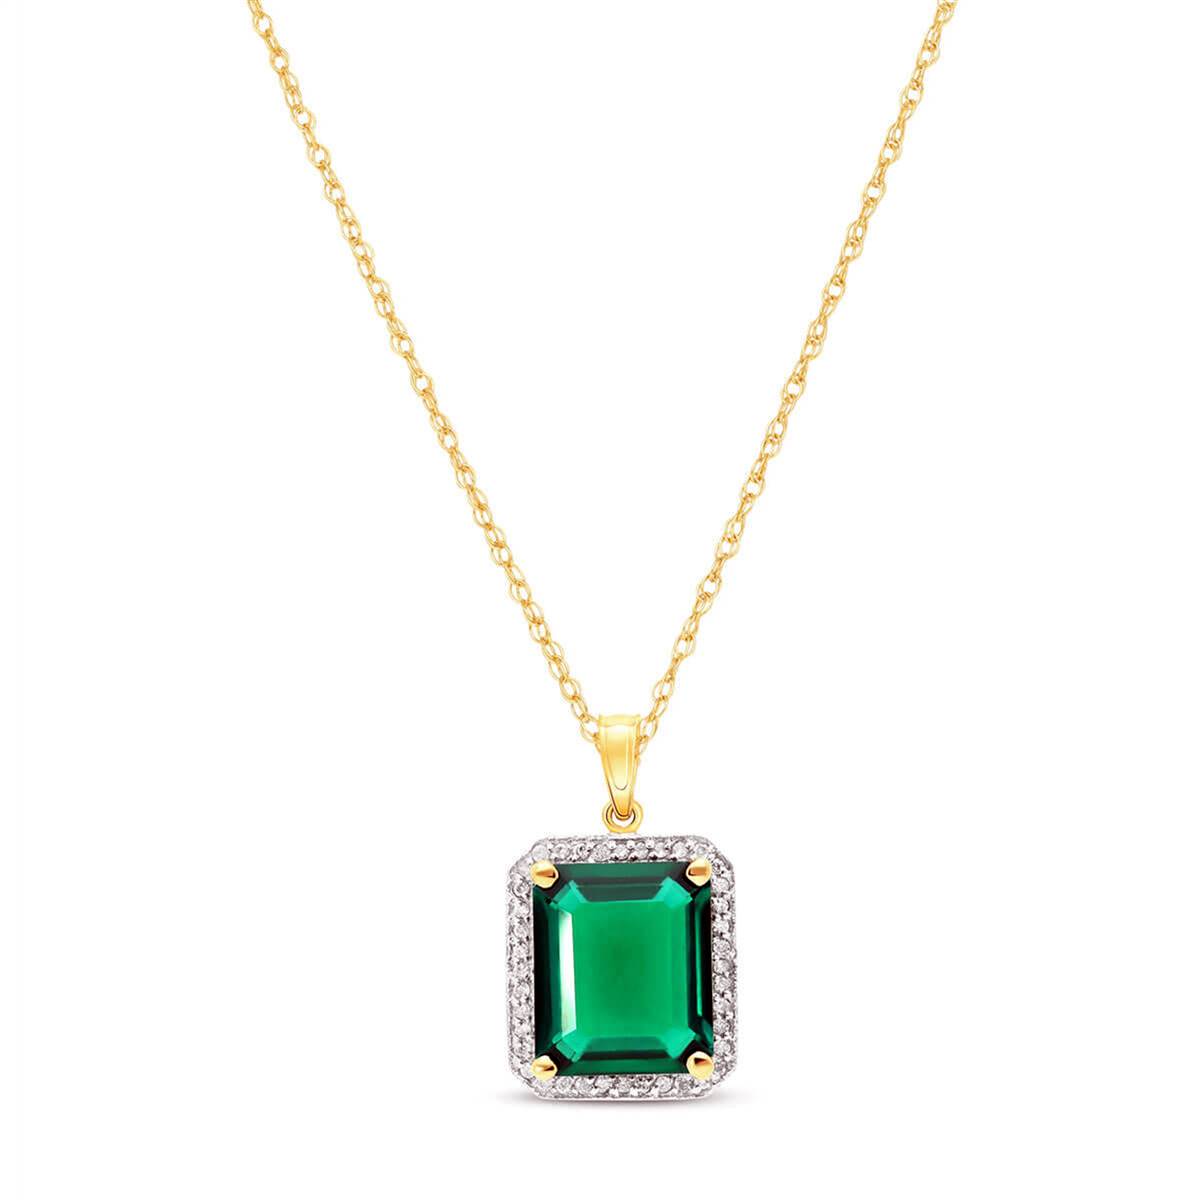 4.70 Carat Total Weight 14K Solid Yellow Gold Emerald Halo Design Pendant Necklace Brilliant Emerald Octagon Shape Cut Natural Diamonds Round Cut Anniversary Engagement Birthday